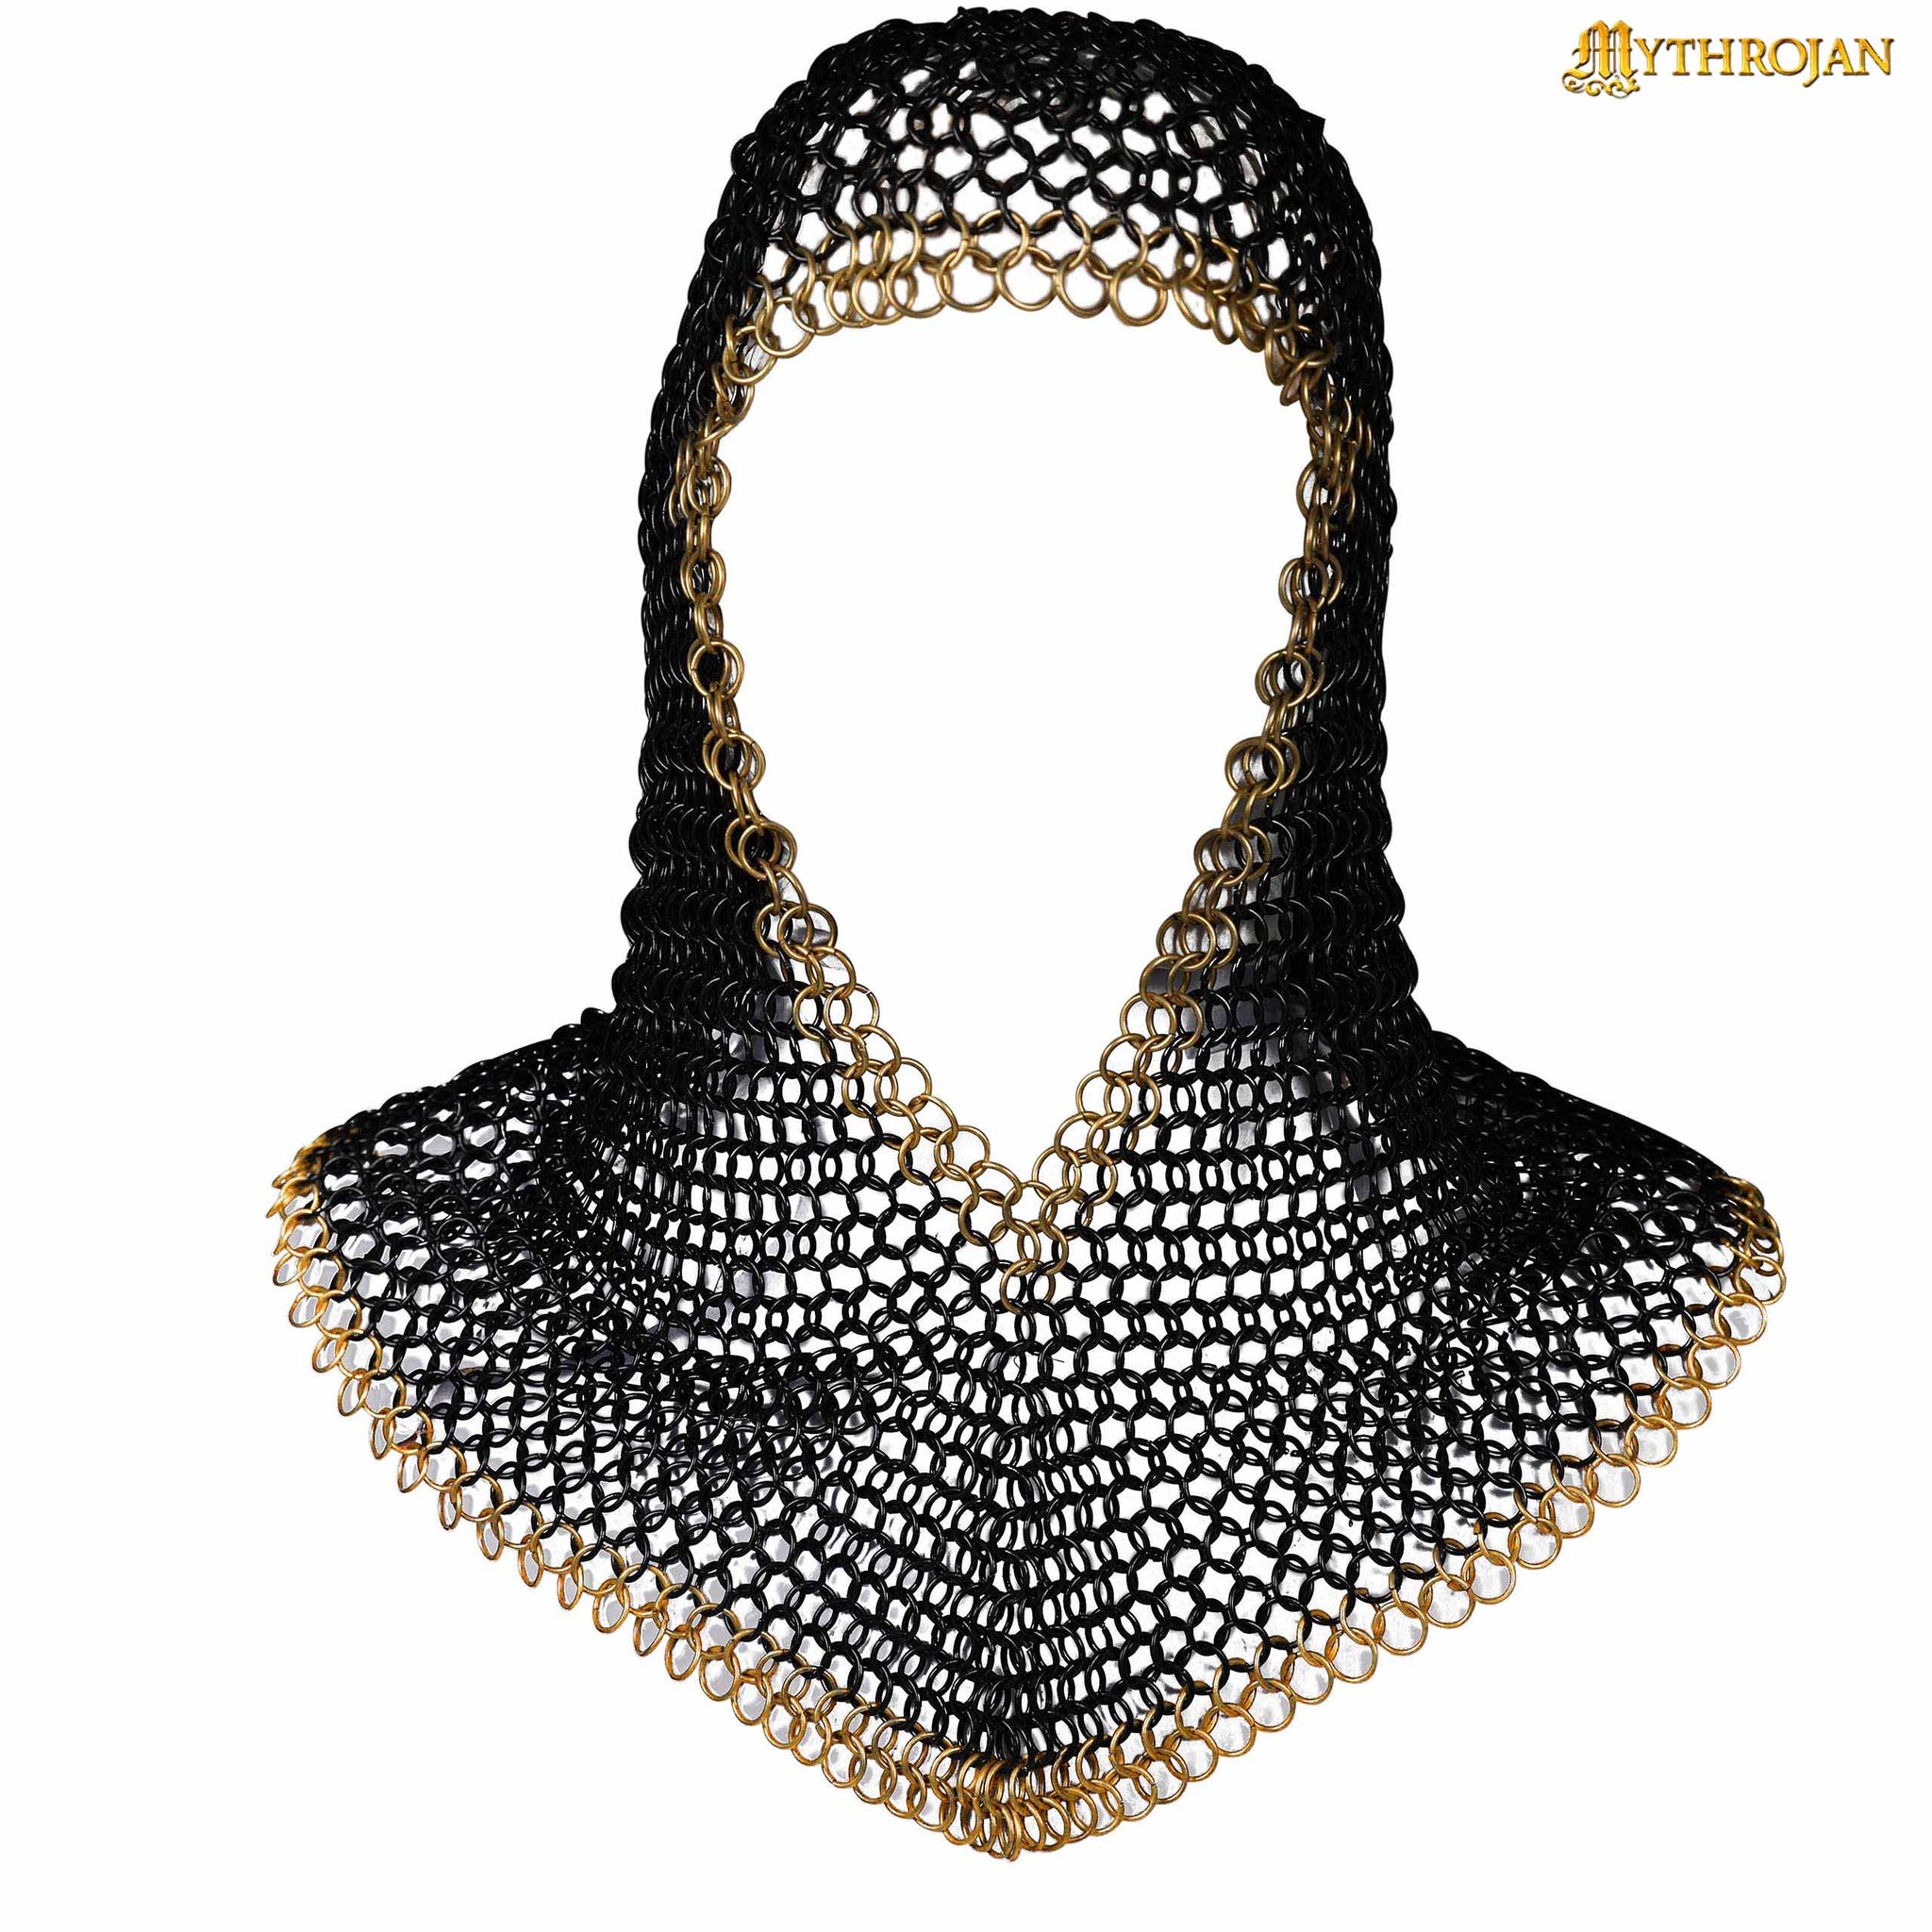  Mythrojan Chainmail Coif Medieval Knight Renaissance